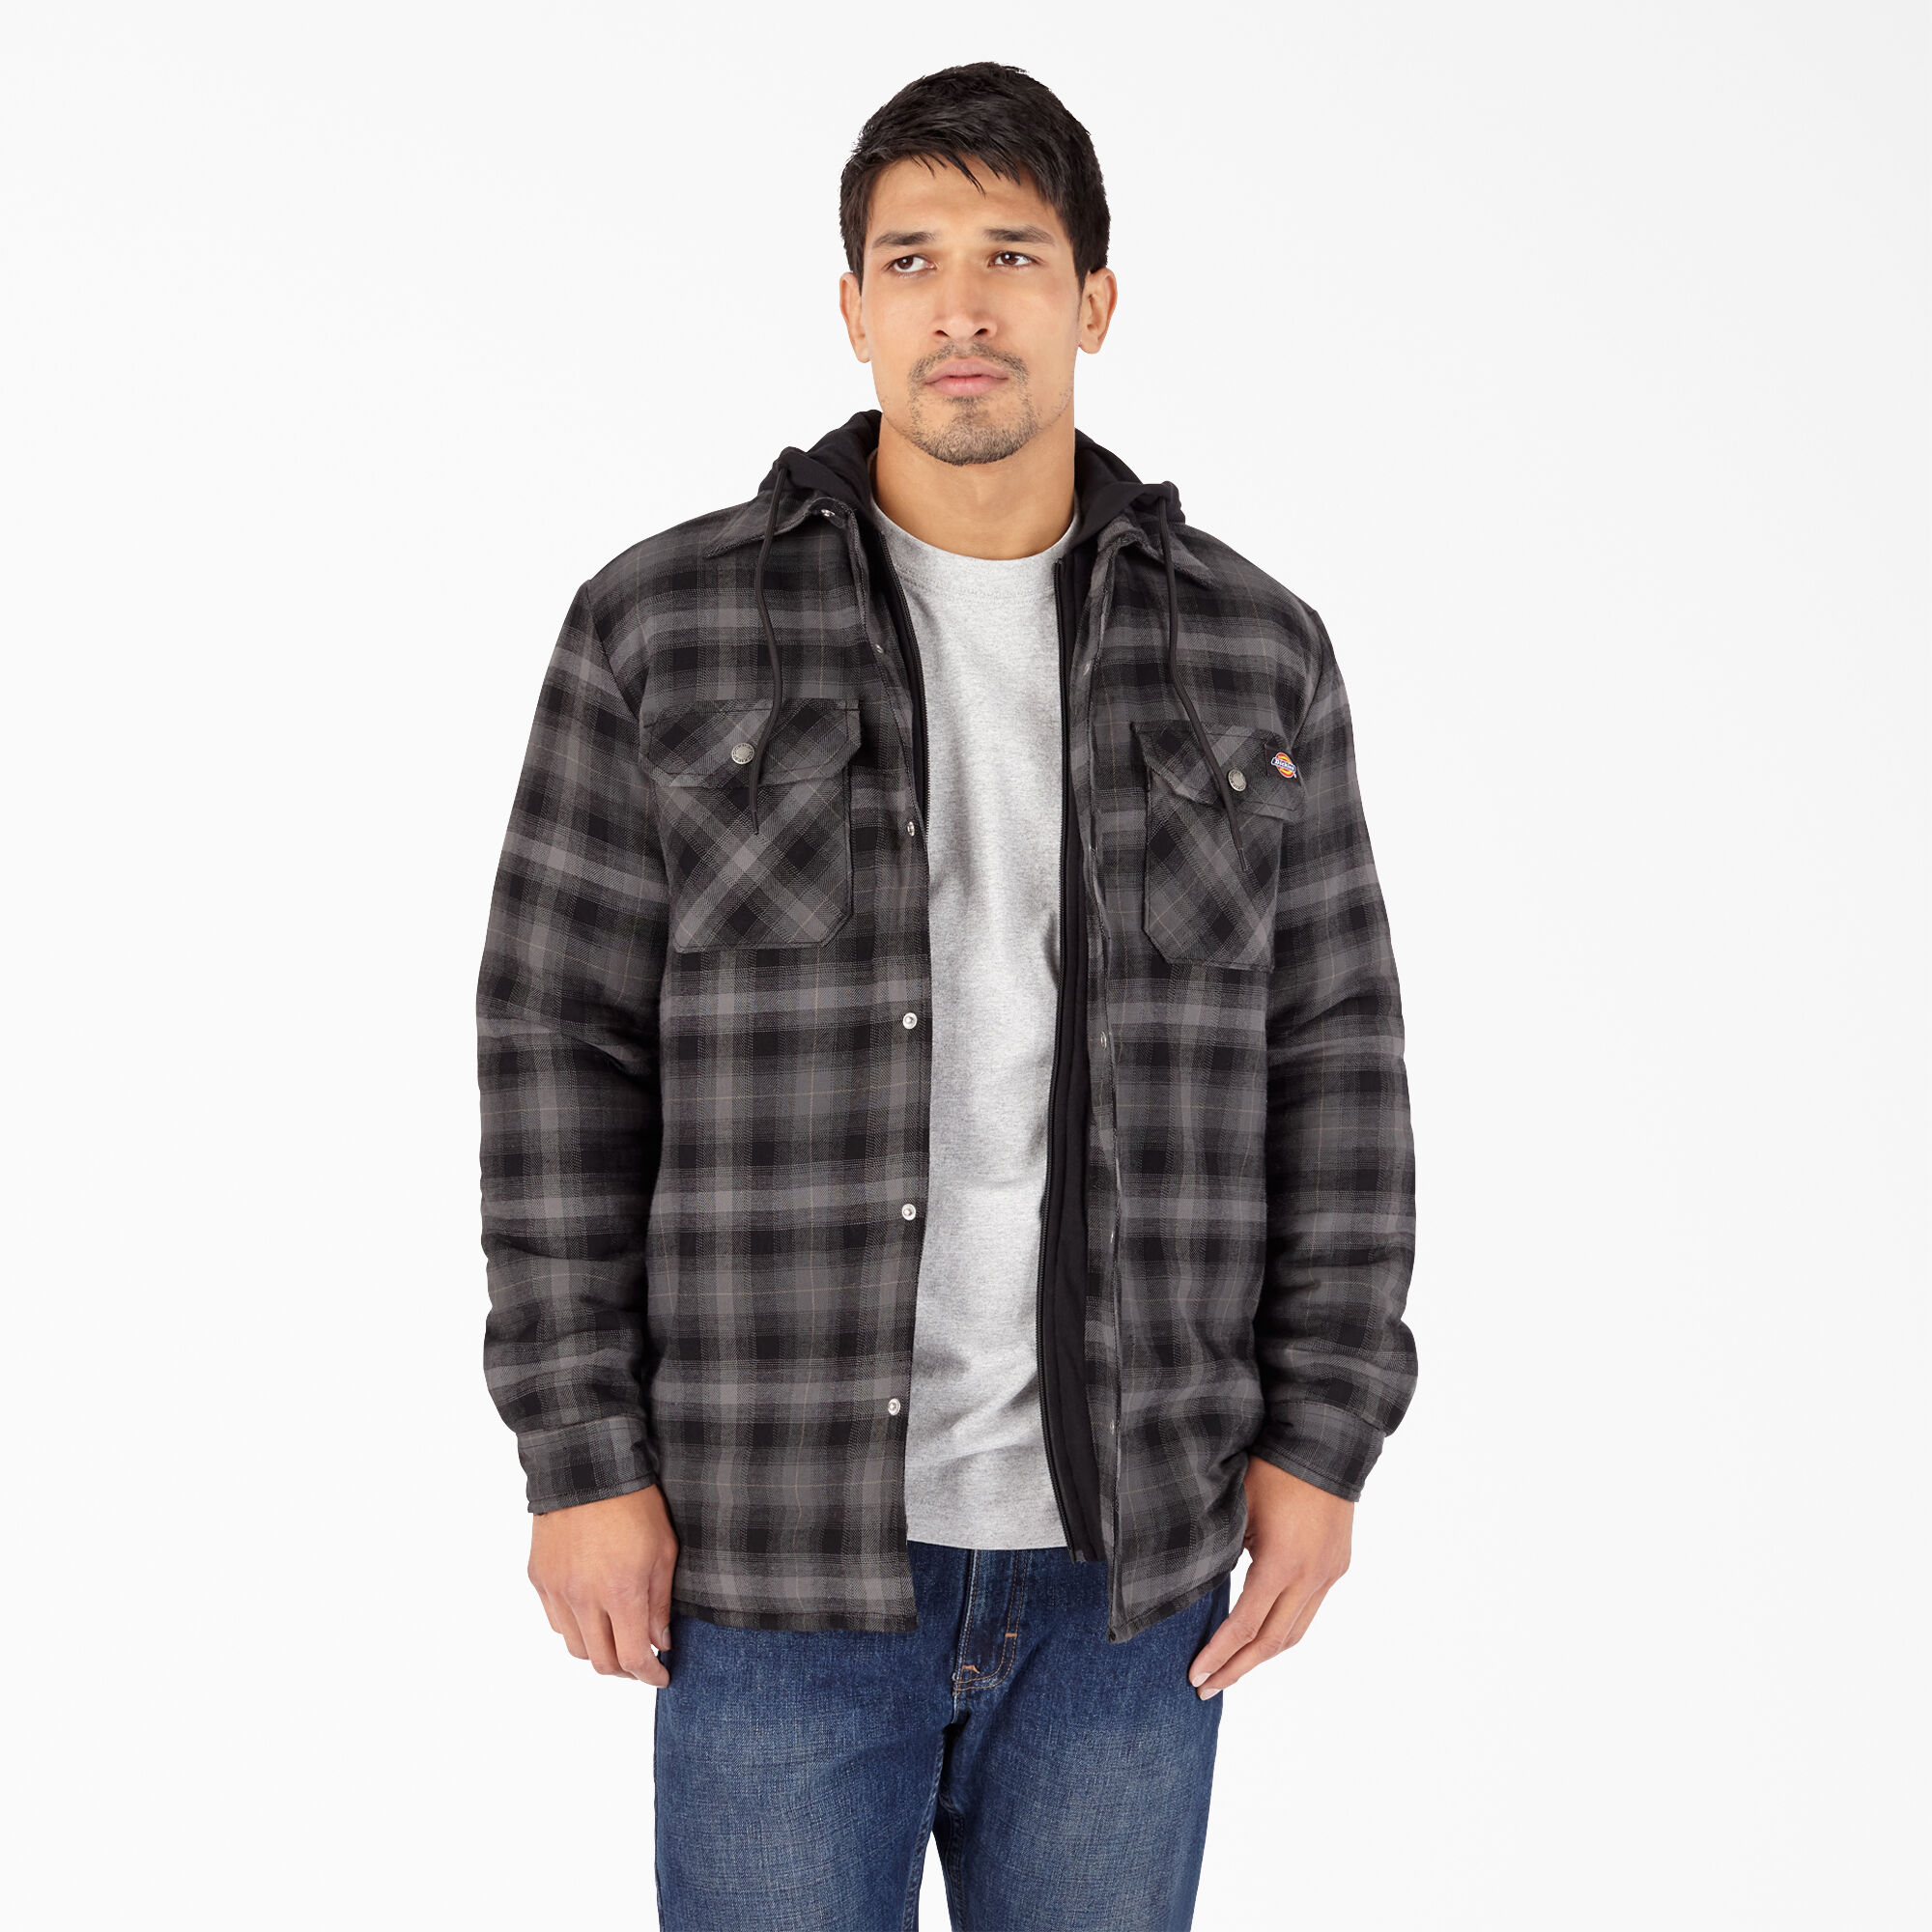 Dickies Sherpa Lined Flannel Shirt Jacket with Hydroshield Chaqueta para Hombre 